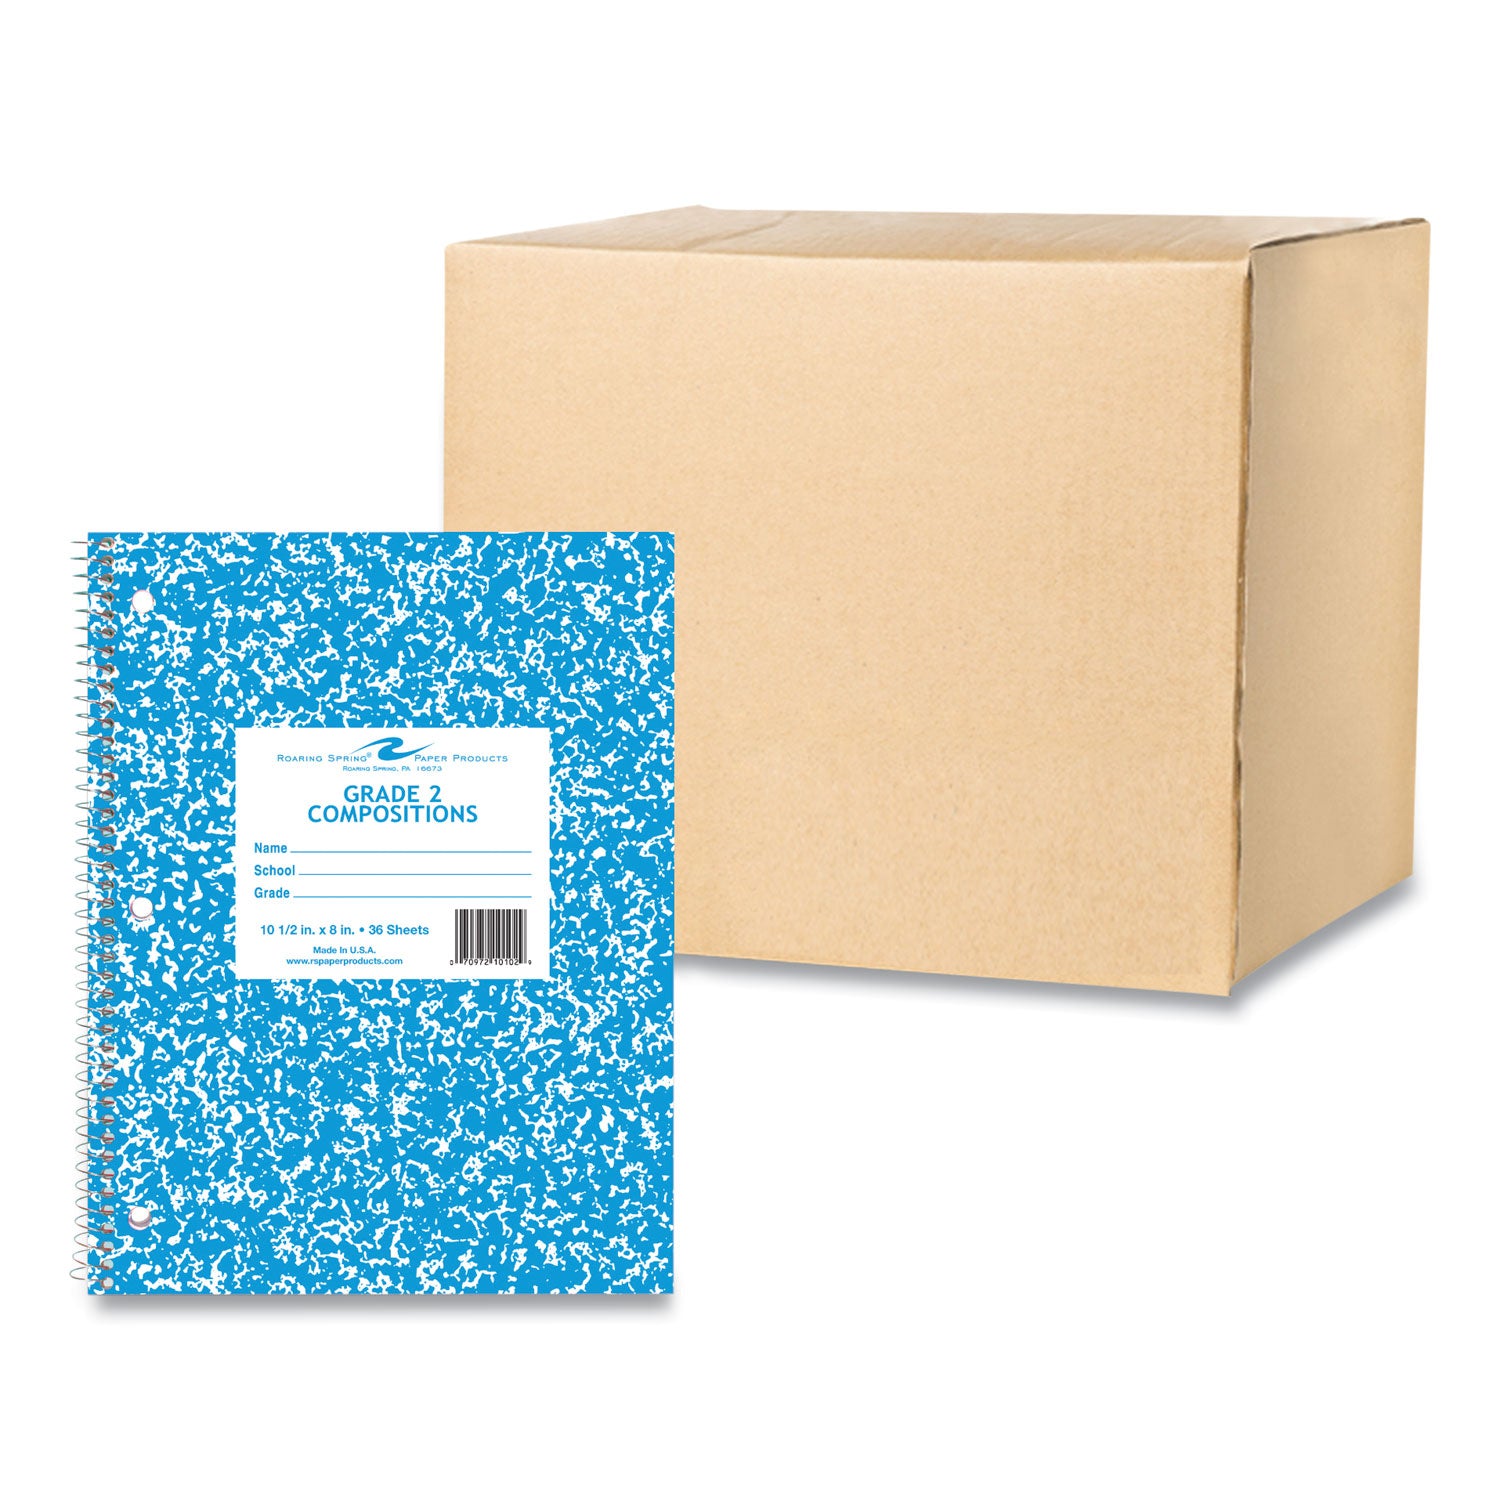 wirebound-notebook-grade-2-manuscript-format-blue-marble-cover-36-105-x-8-sheets-48-ct-ships-in-4-6-business-days_roa10102cs - 1